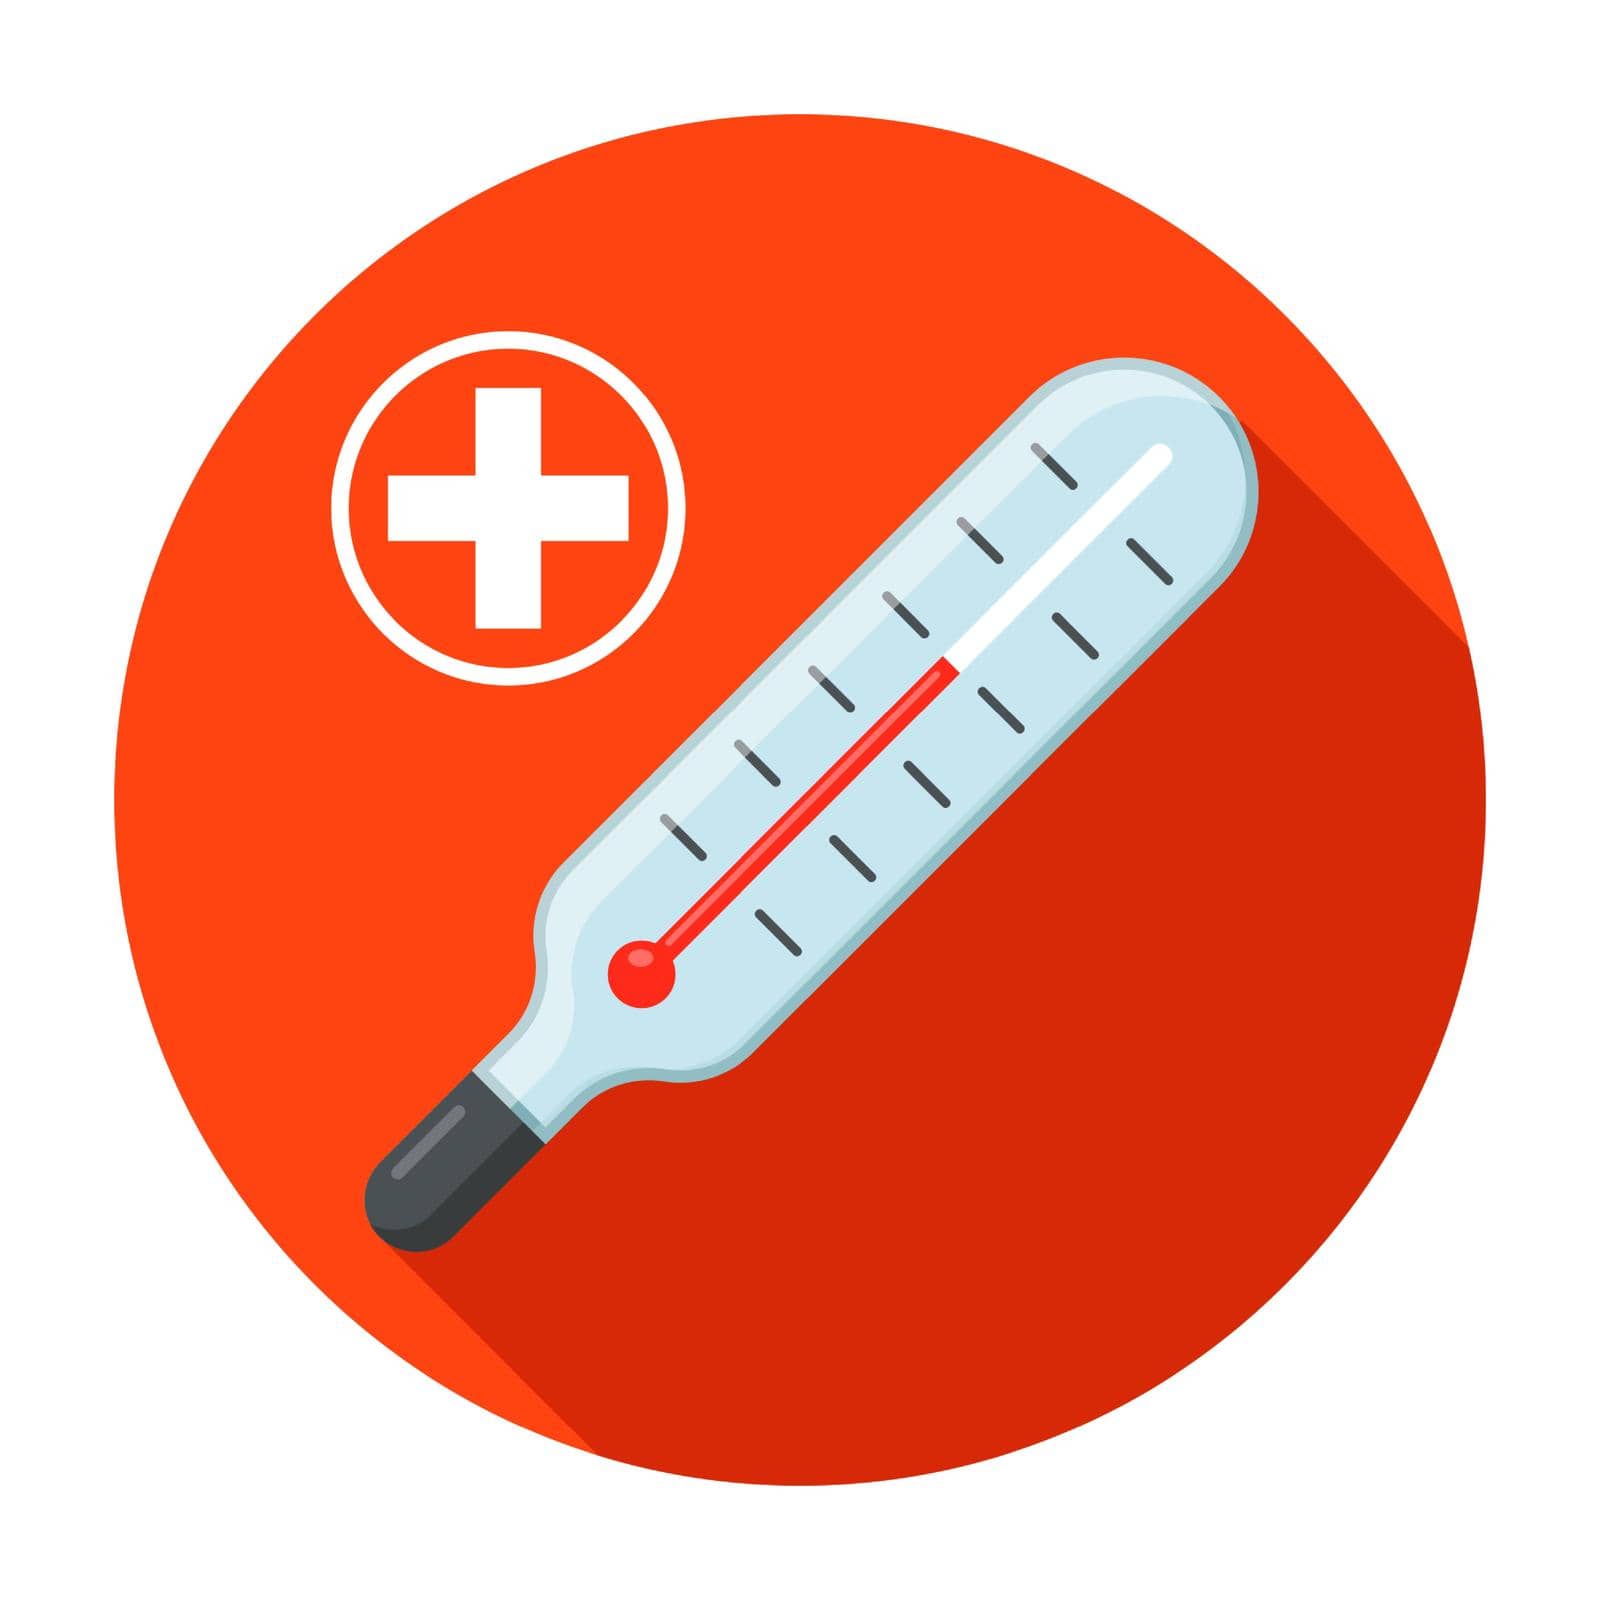 thermometer for measuring temperature to a person. icon on the red circle. by PlutusART